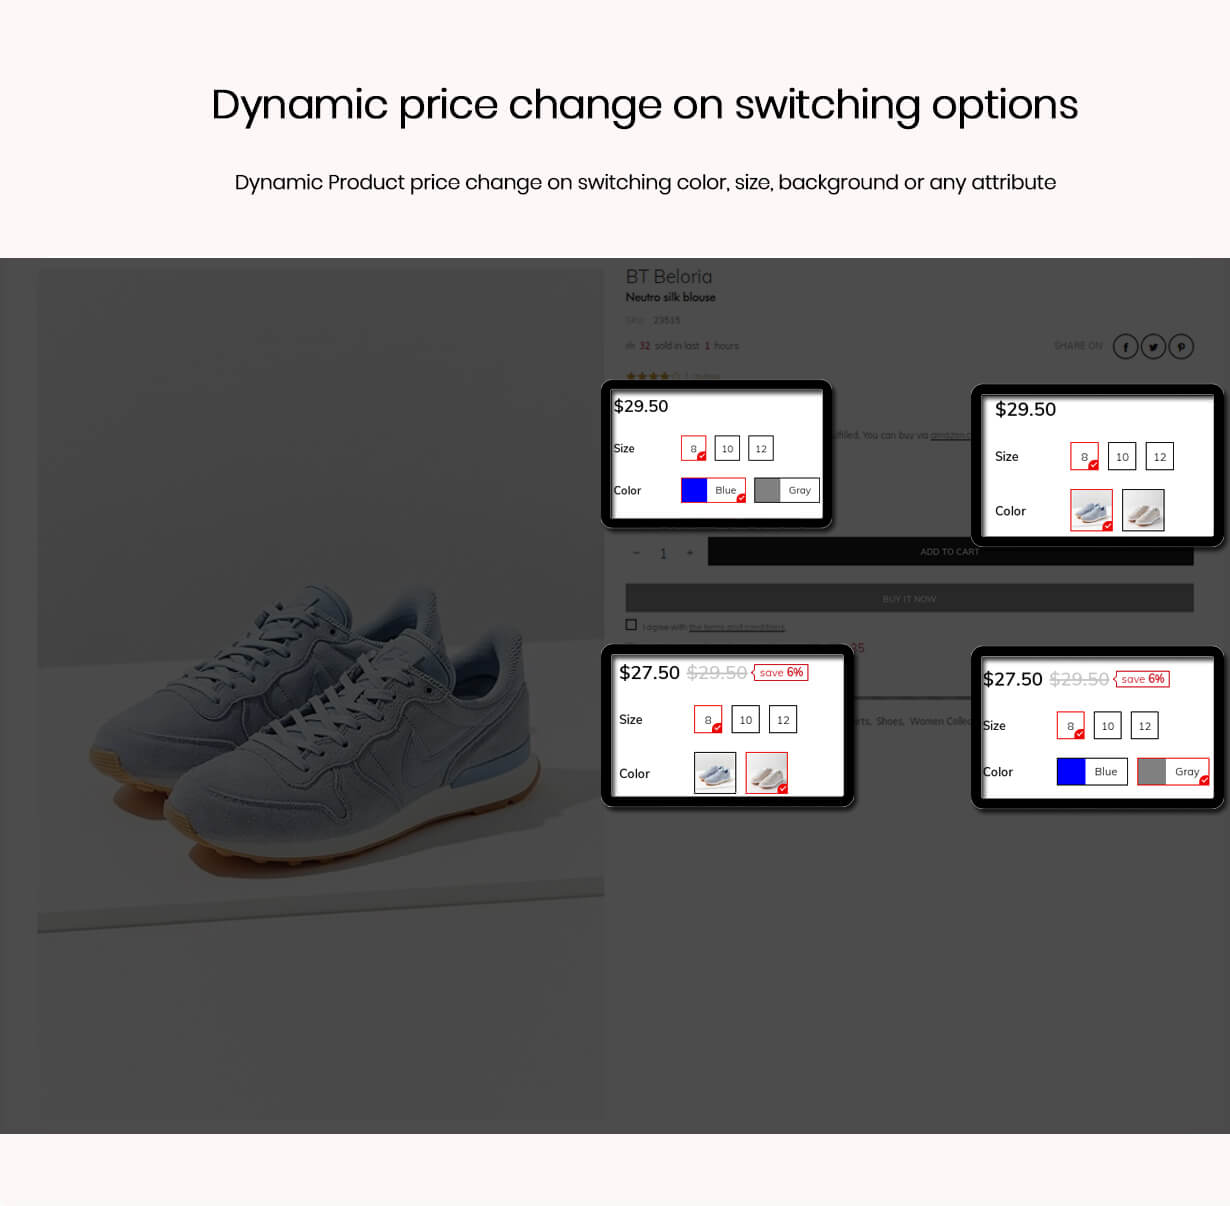 Dynamic product price change